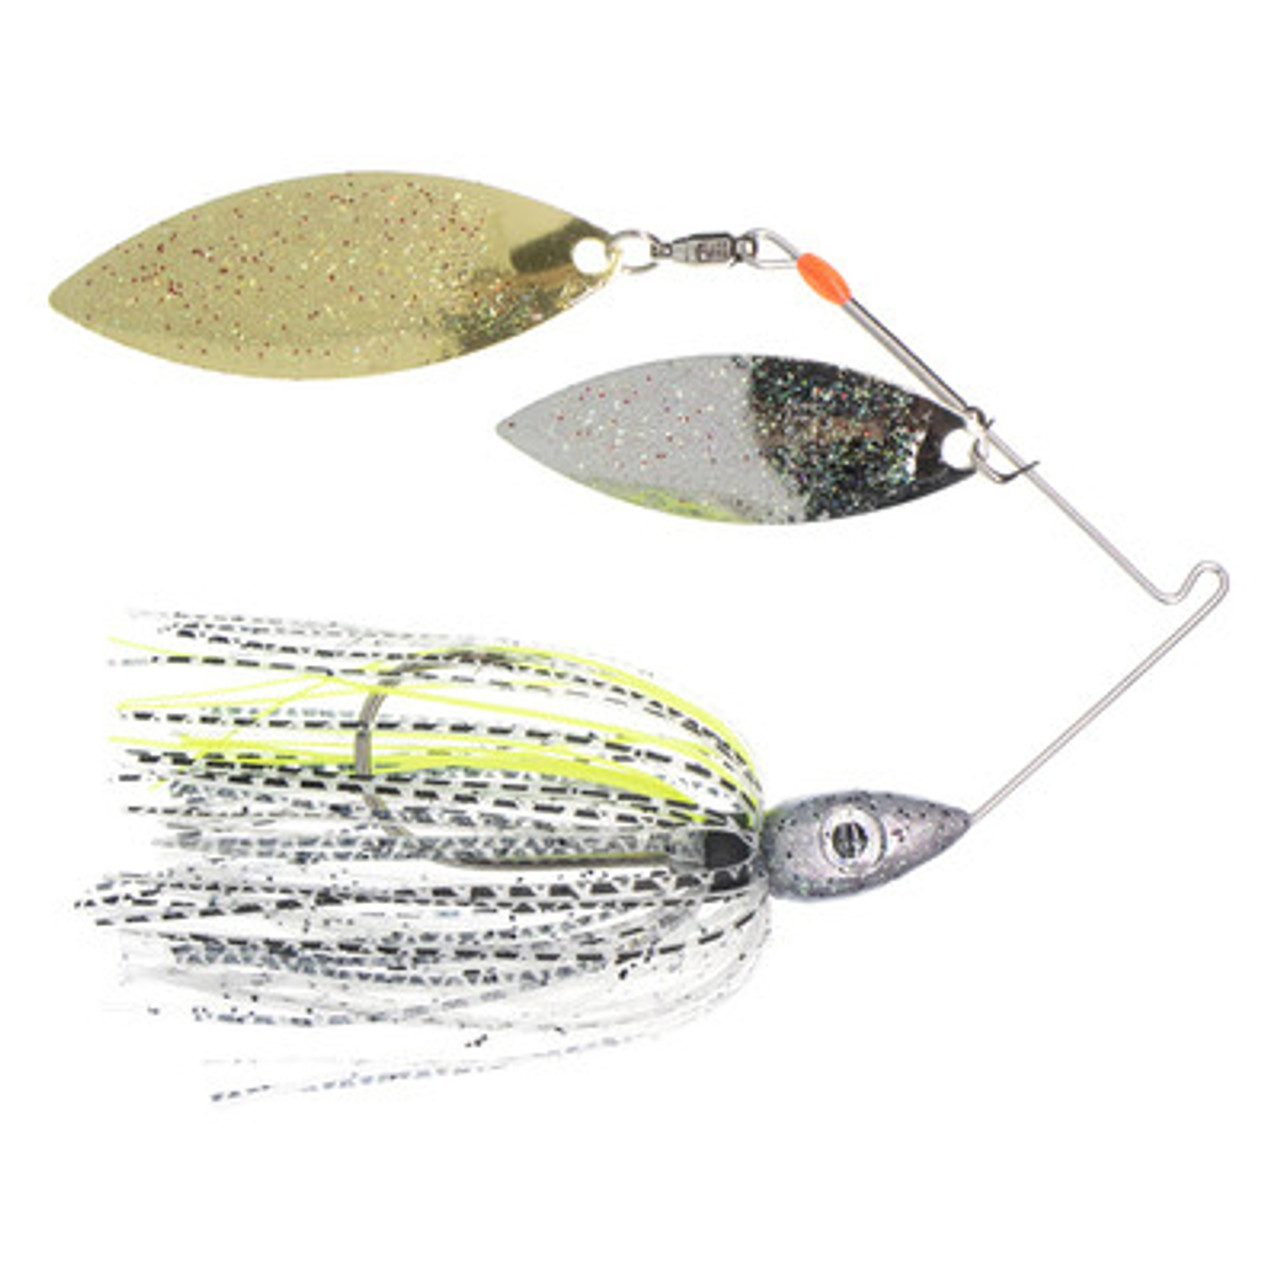 Nichols Lures Pulsator Metal Flake Double Willow Spinnerbait, Bombshell Shad, 3/8-Ounce